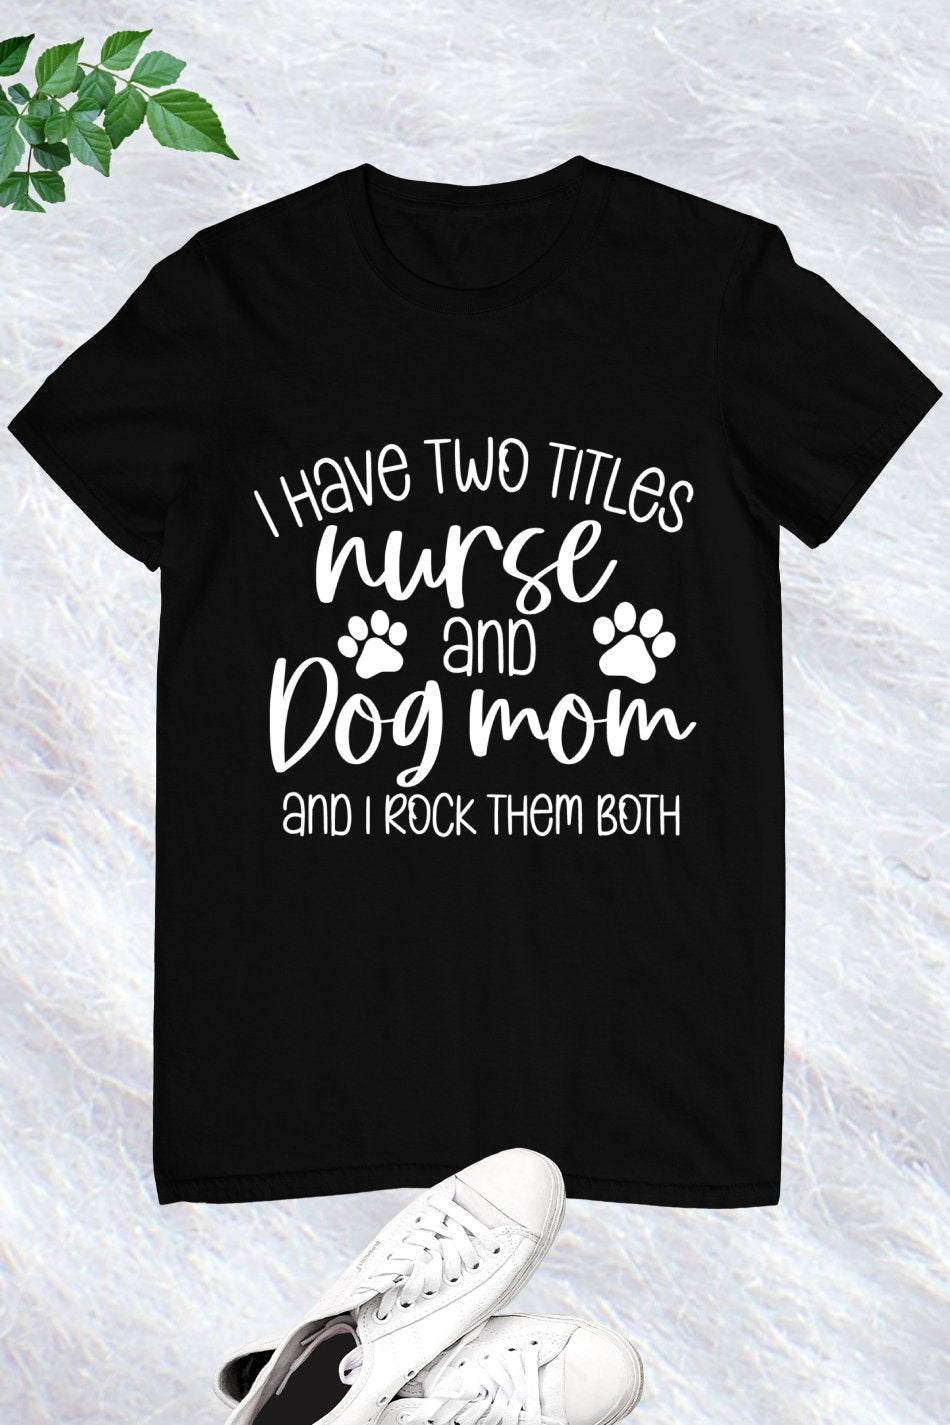 I Have Two Titles Nurse and Dog Mom Funny Shirts